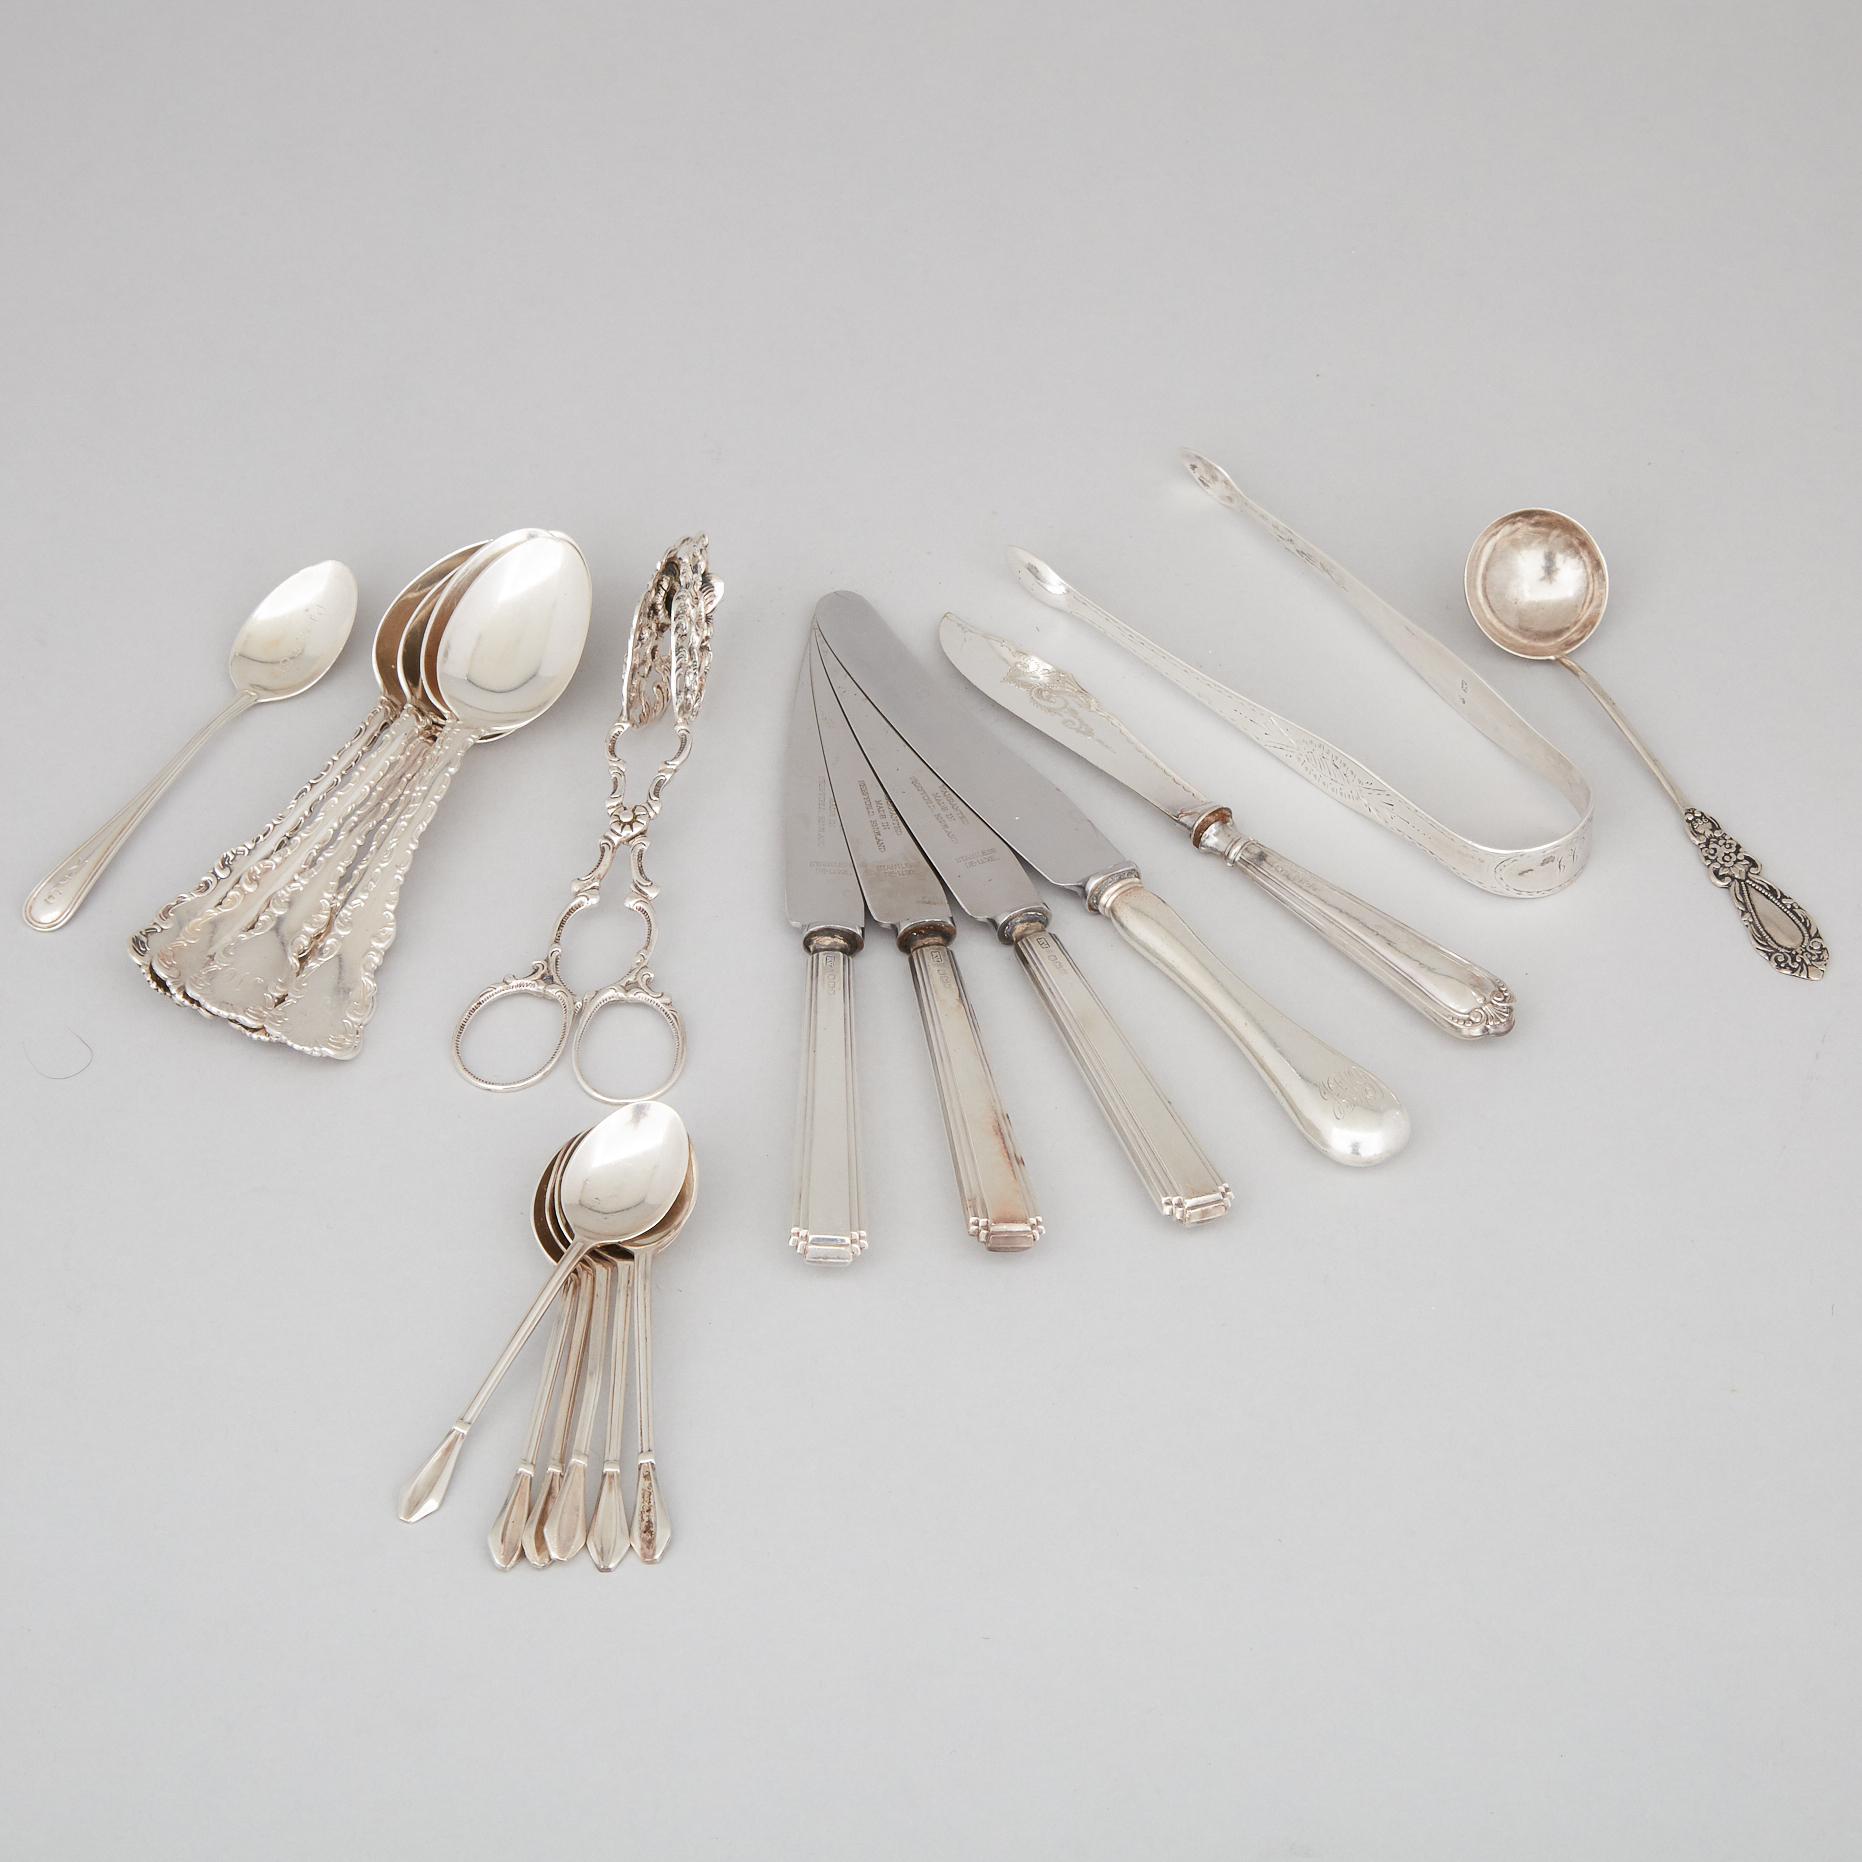 Group of English and North American Silver Flatware Including a Pair of Sugar Tongs by Hester Bateman, London, 1784-85